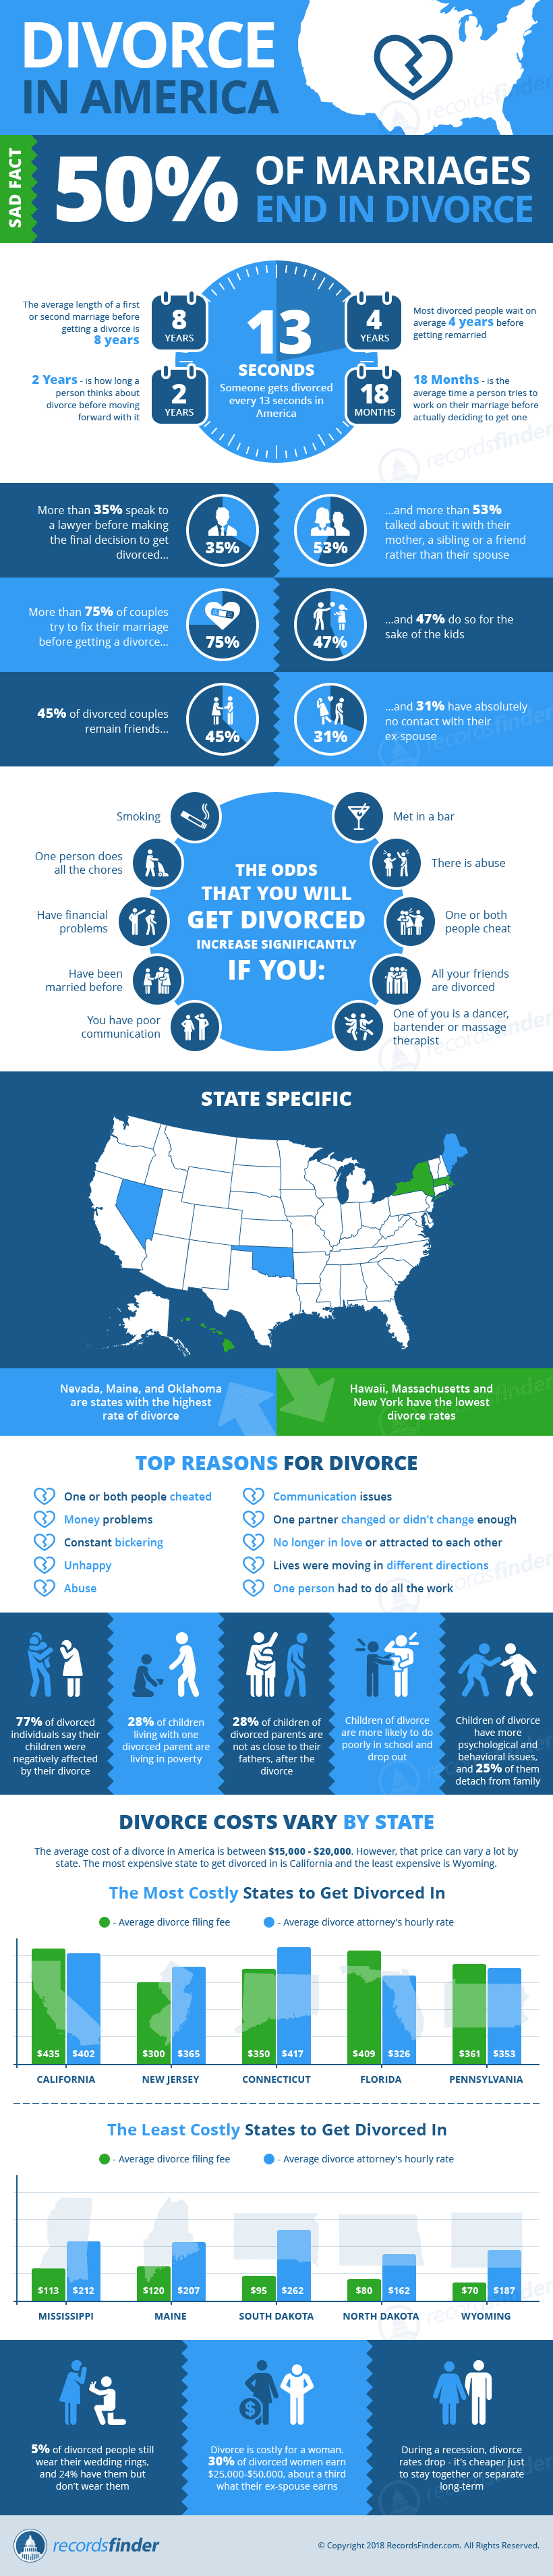 The Institution of Divorce in America: Facts and Figures - Infographic